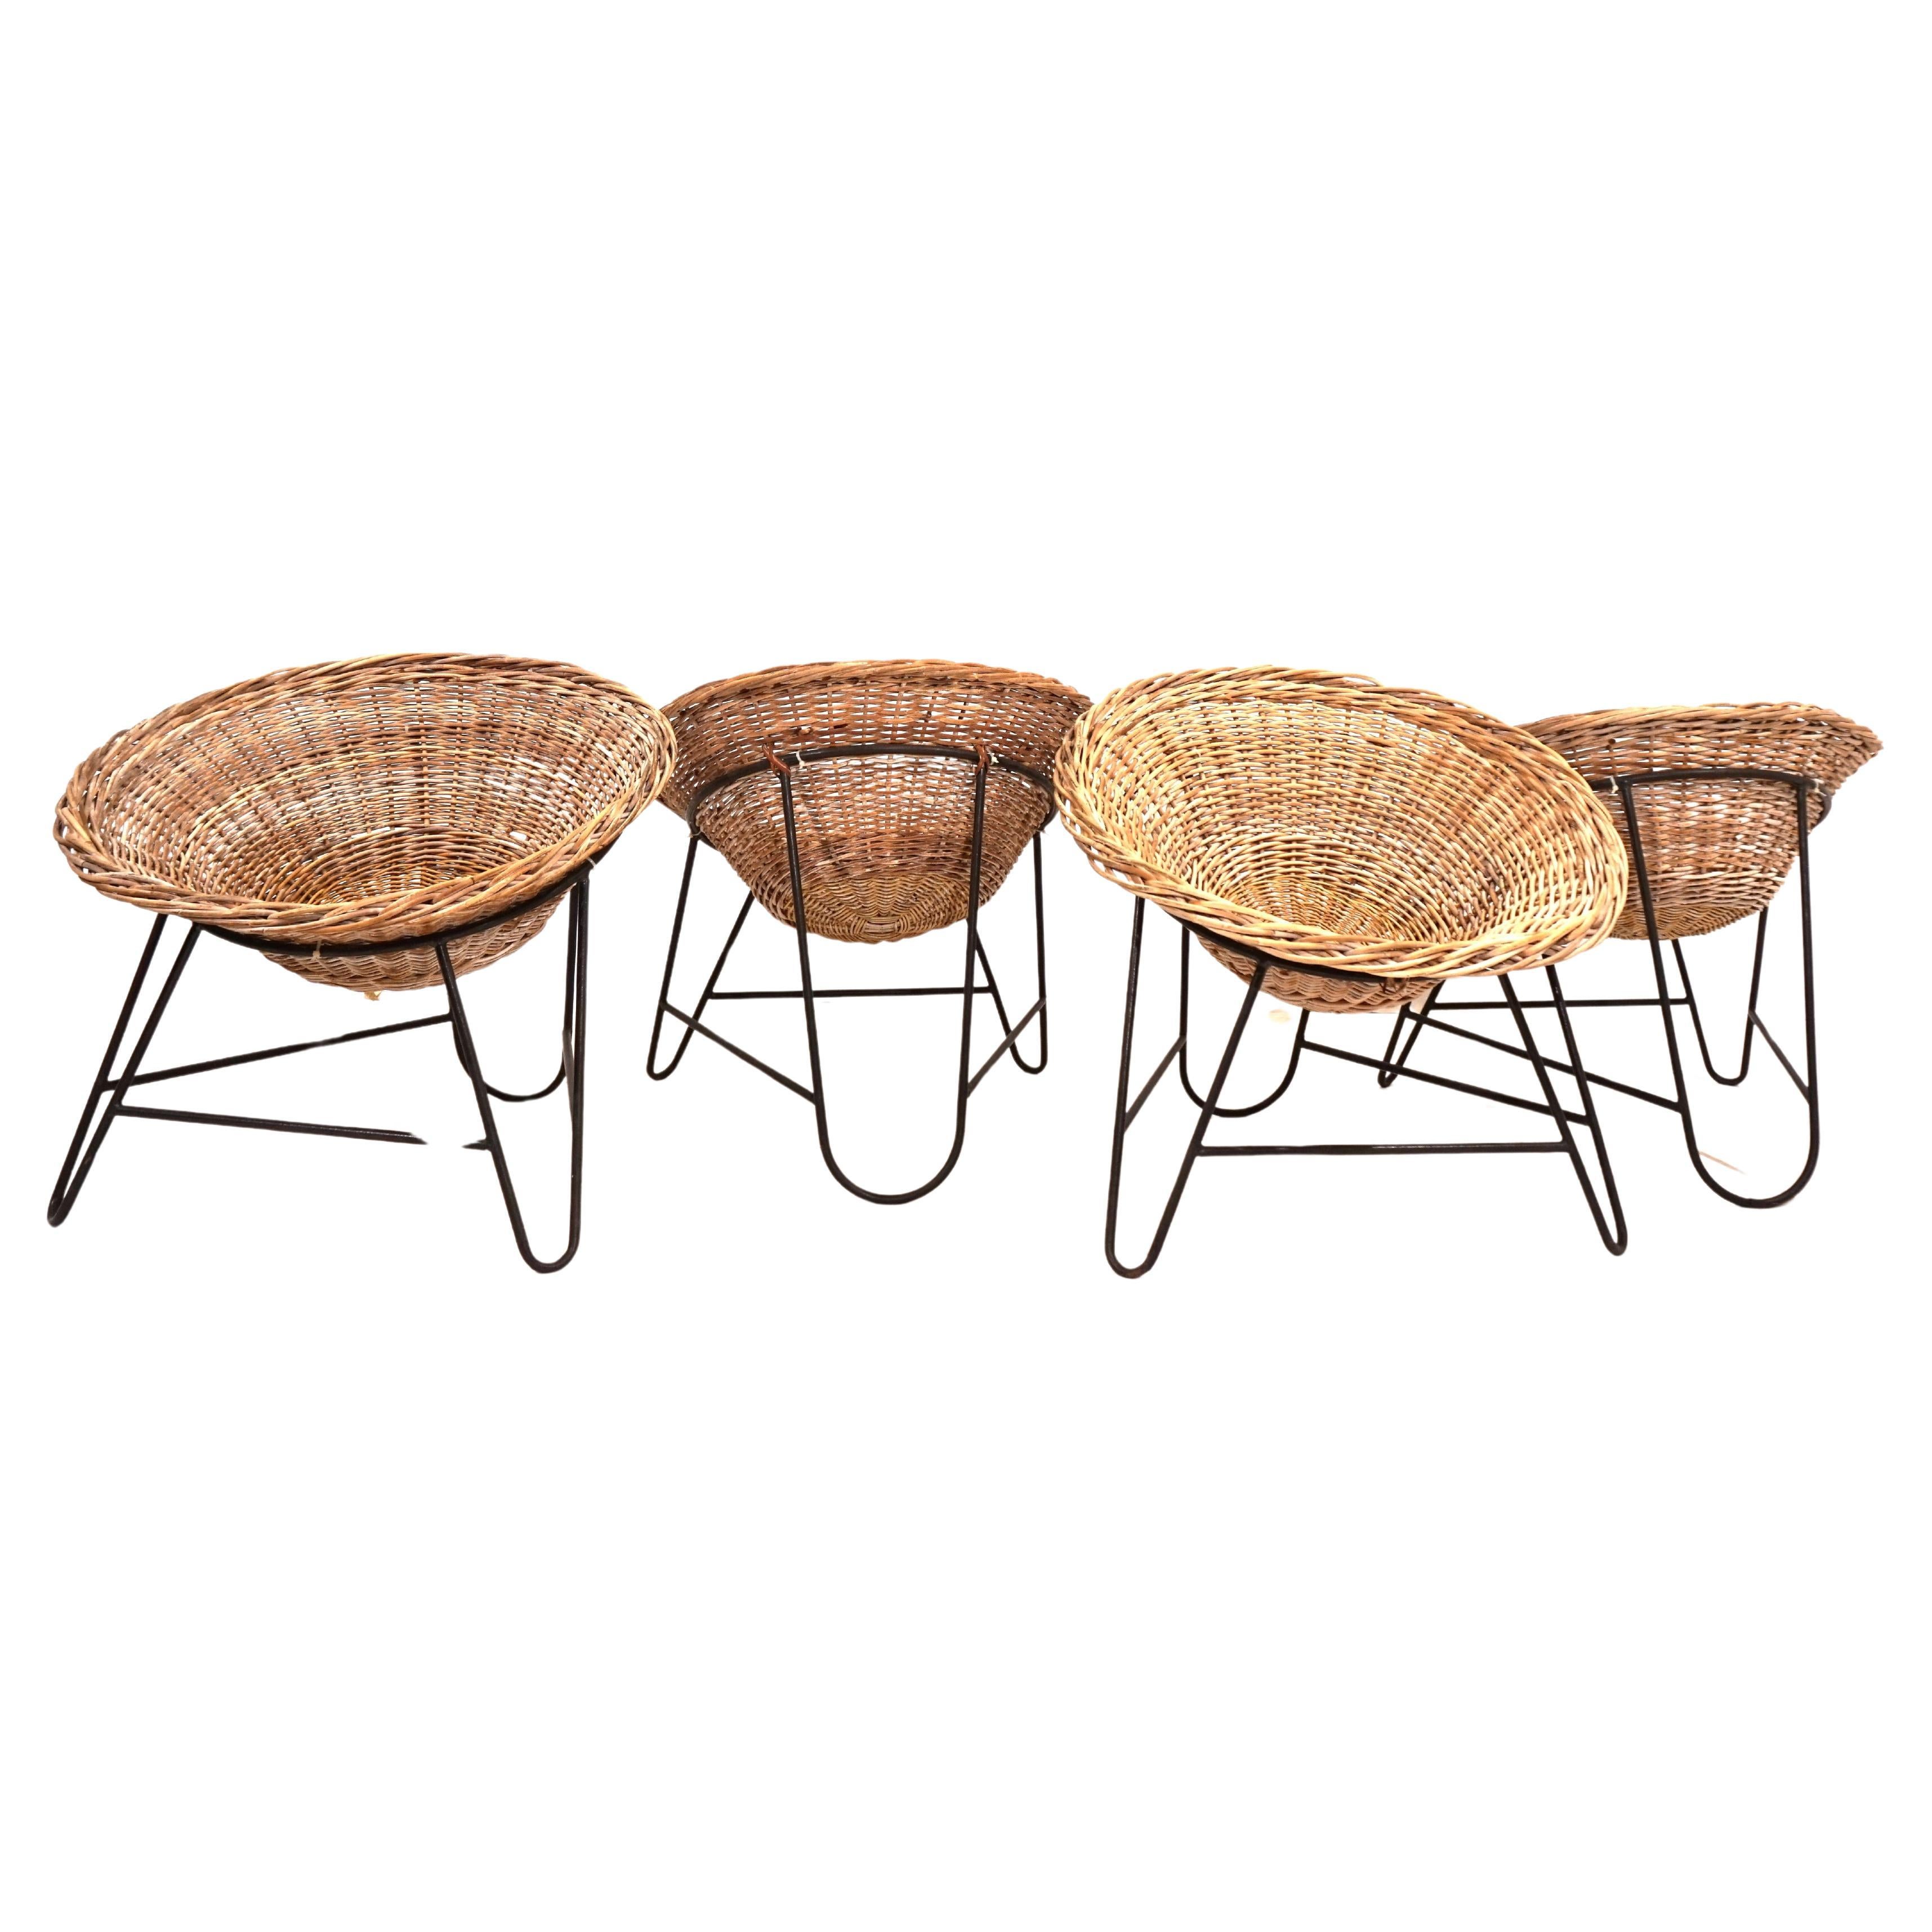 What is the best make of rattan furniture?